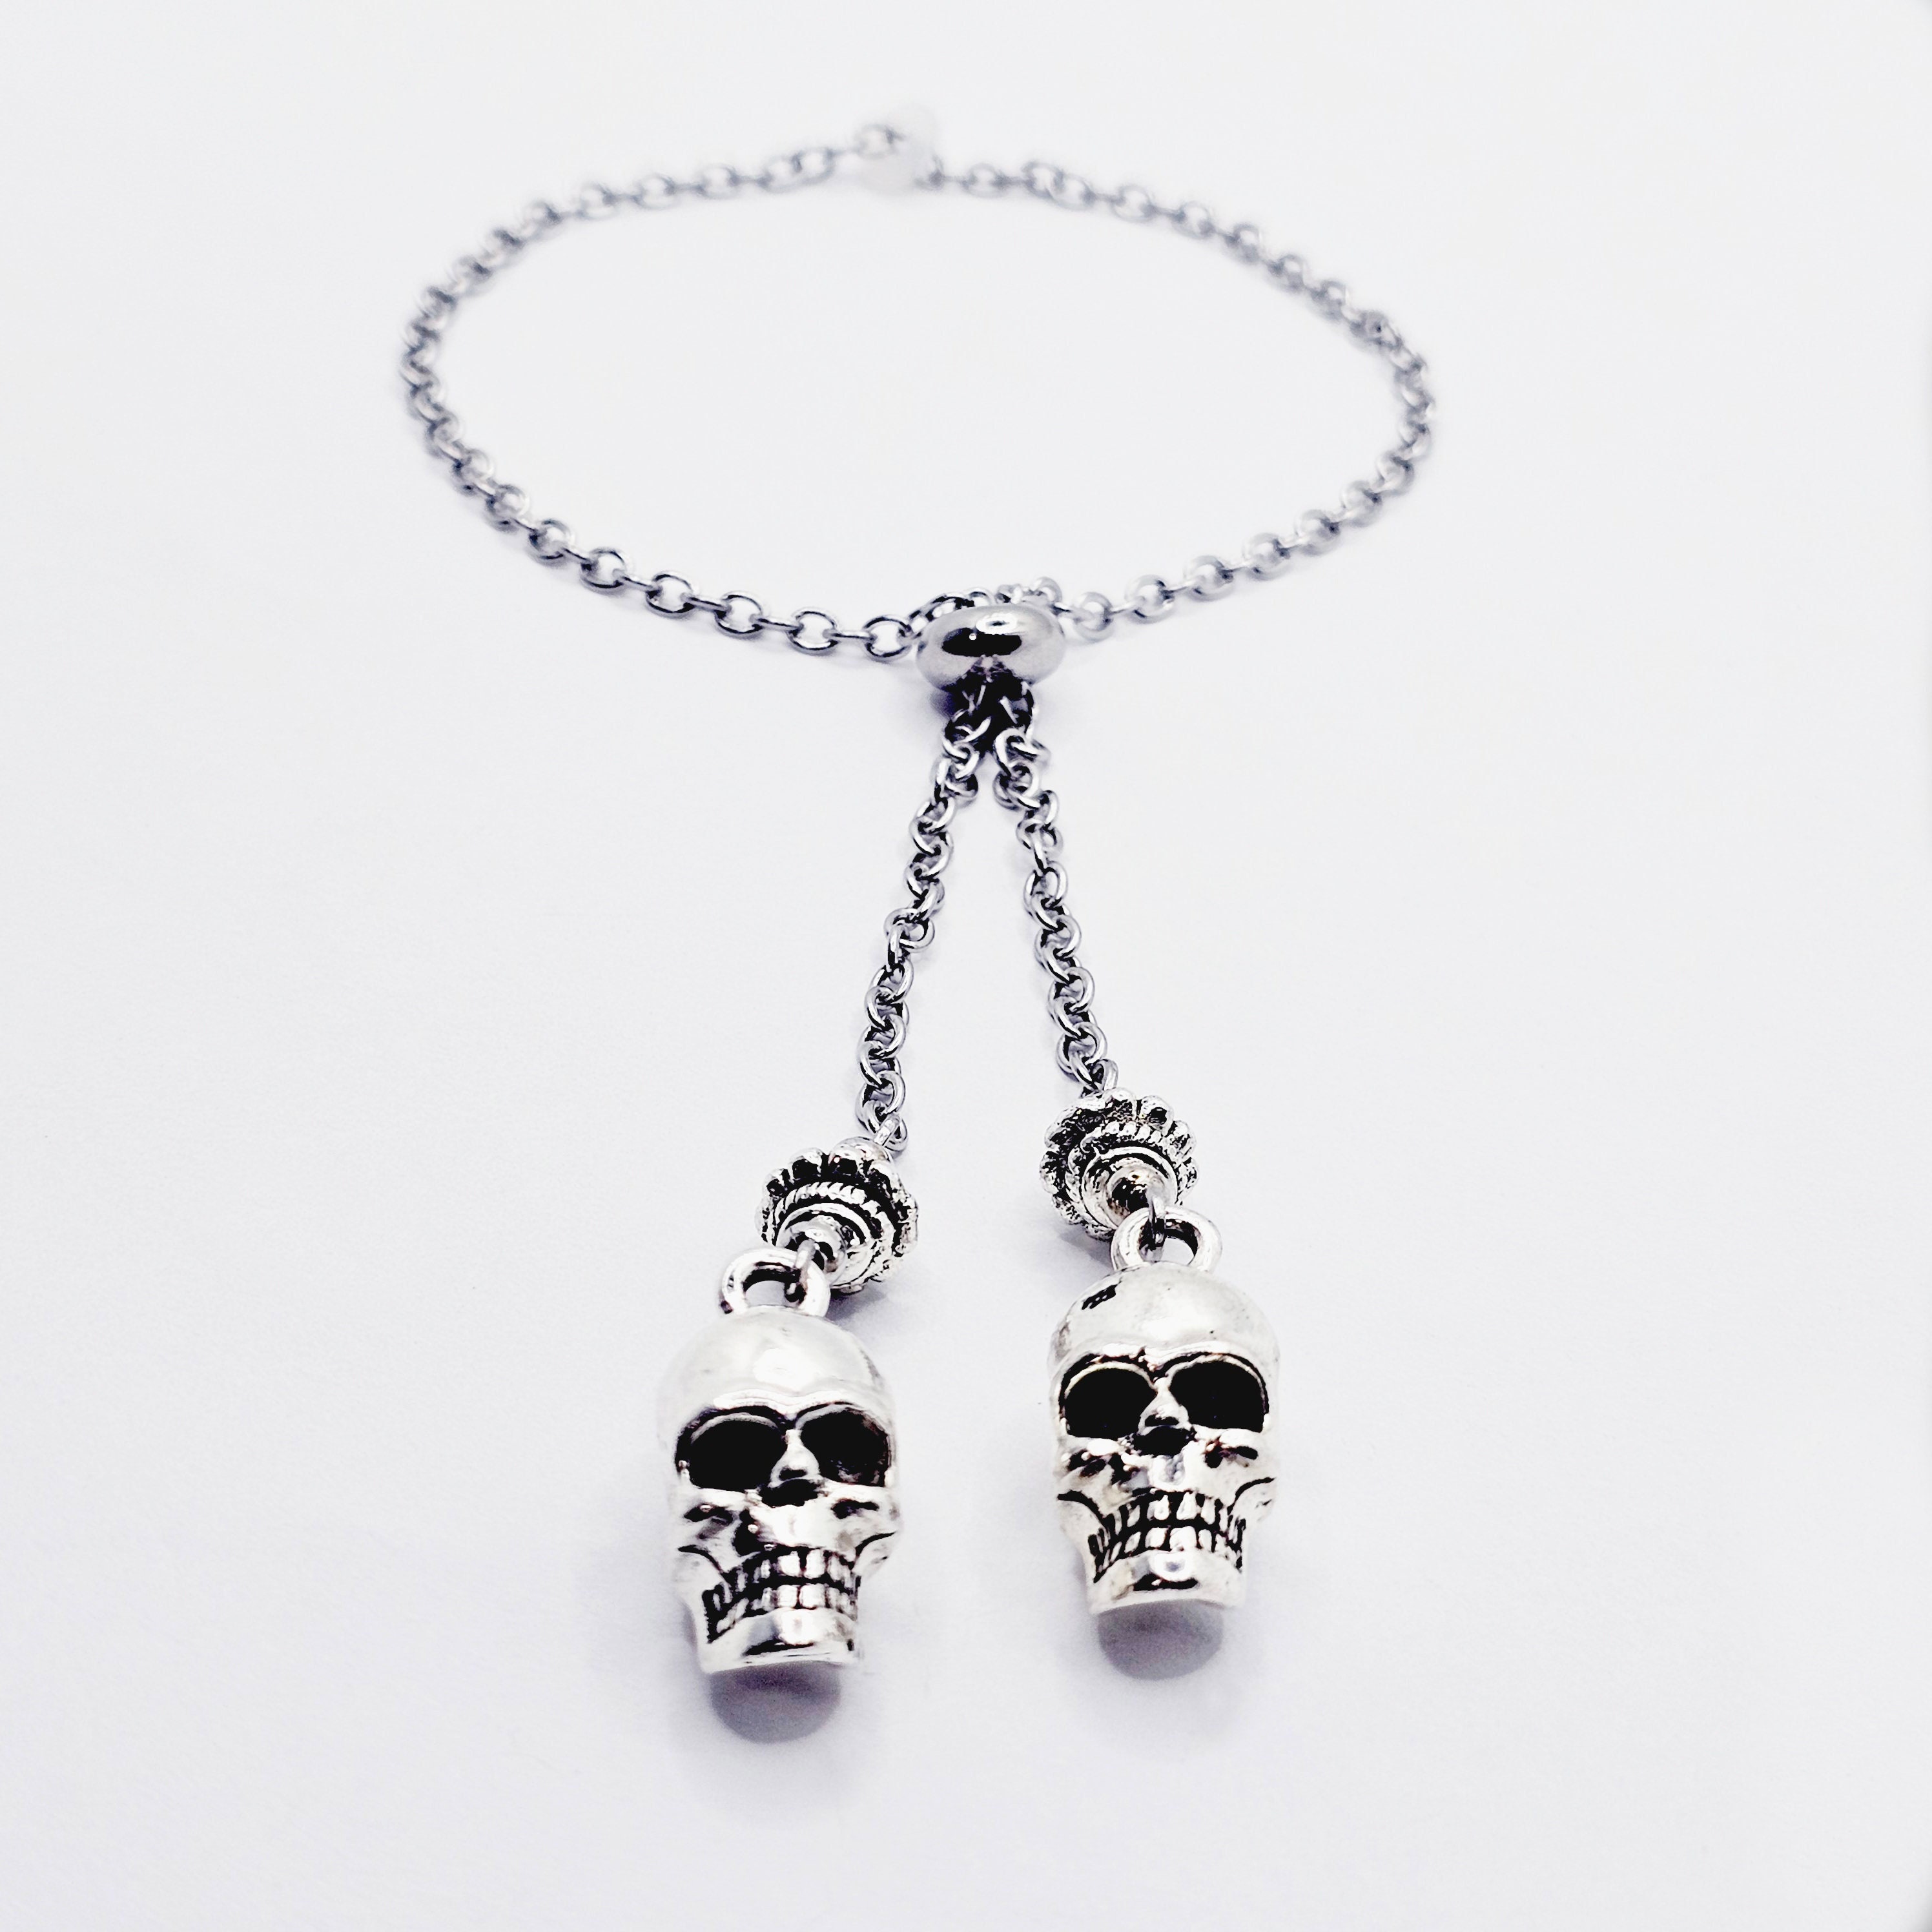 Chain Penis Noose with Skulls. Adjustable Cock Bracelet, Non Piercing Penis Jewelry for Men. MATURE photo